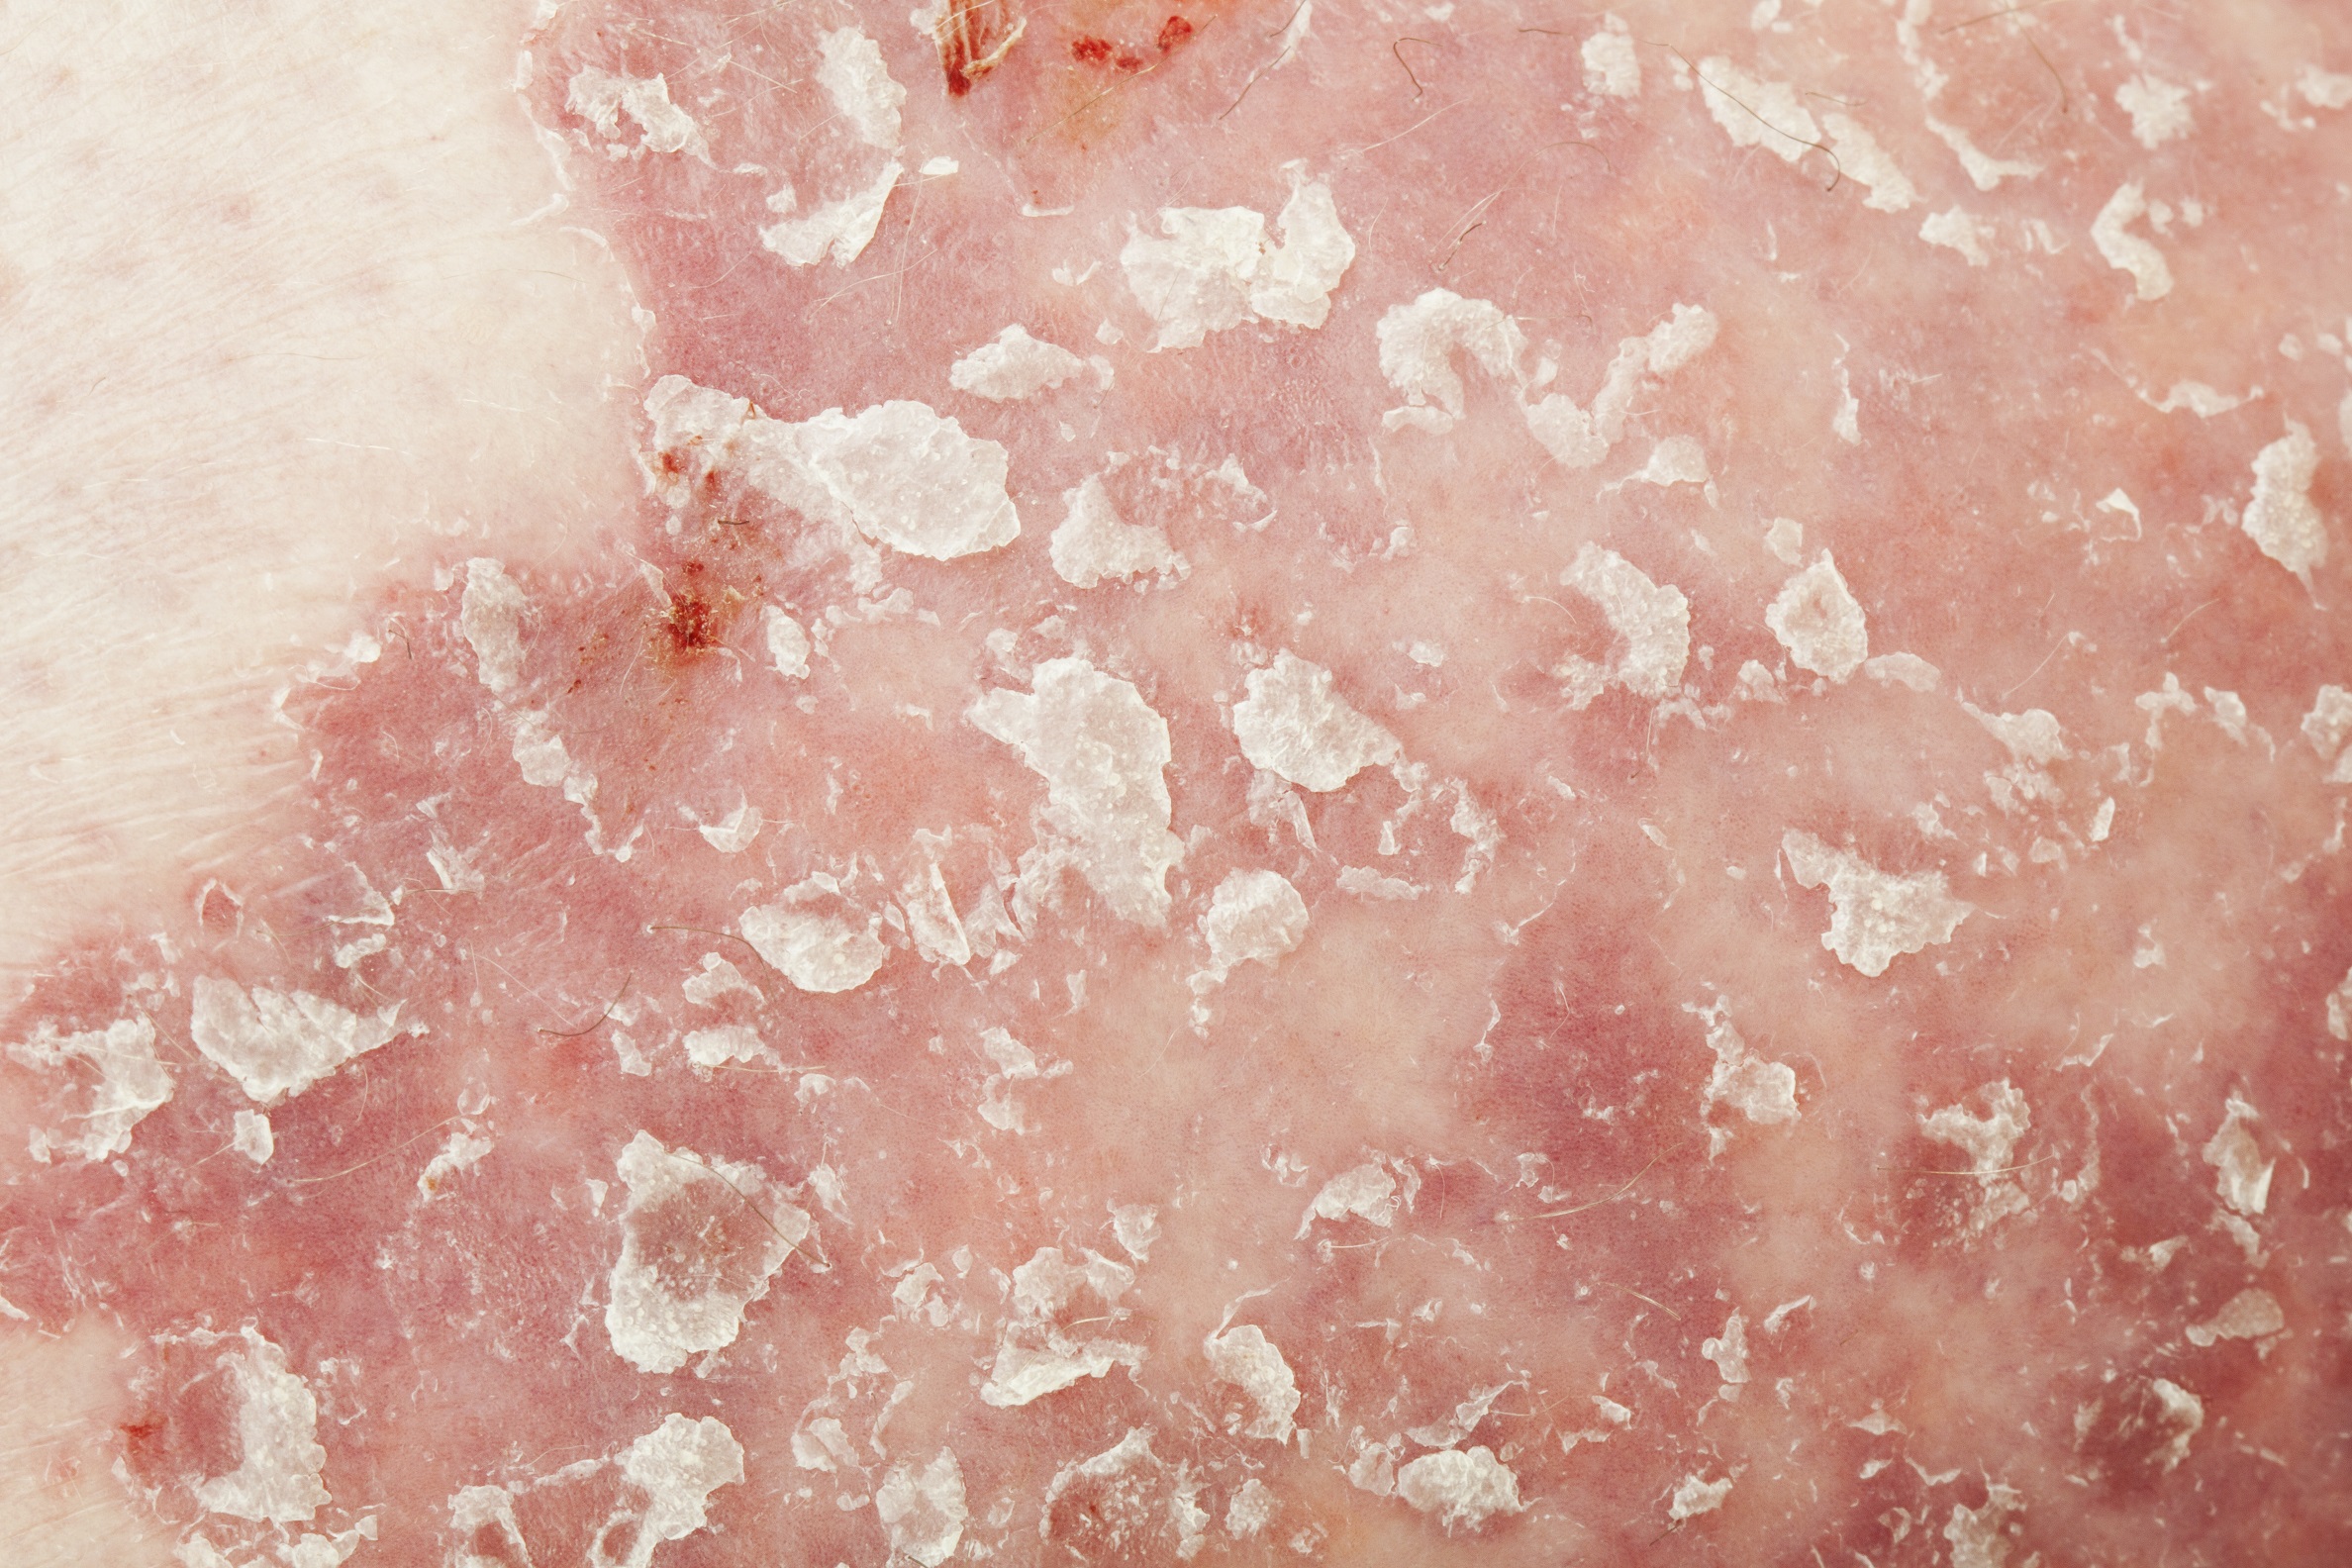 How do I Know if my Eczema is Infected?